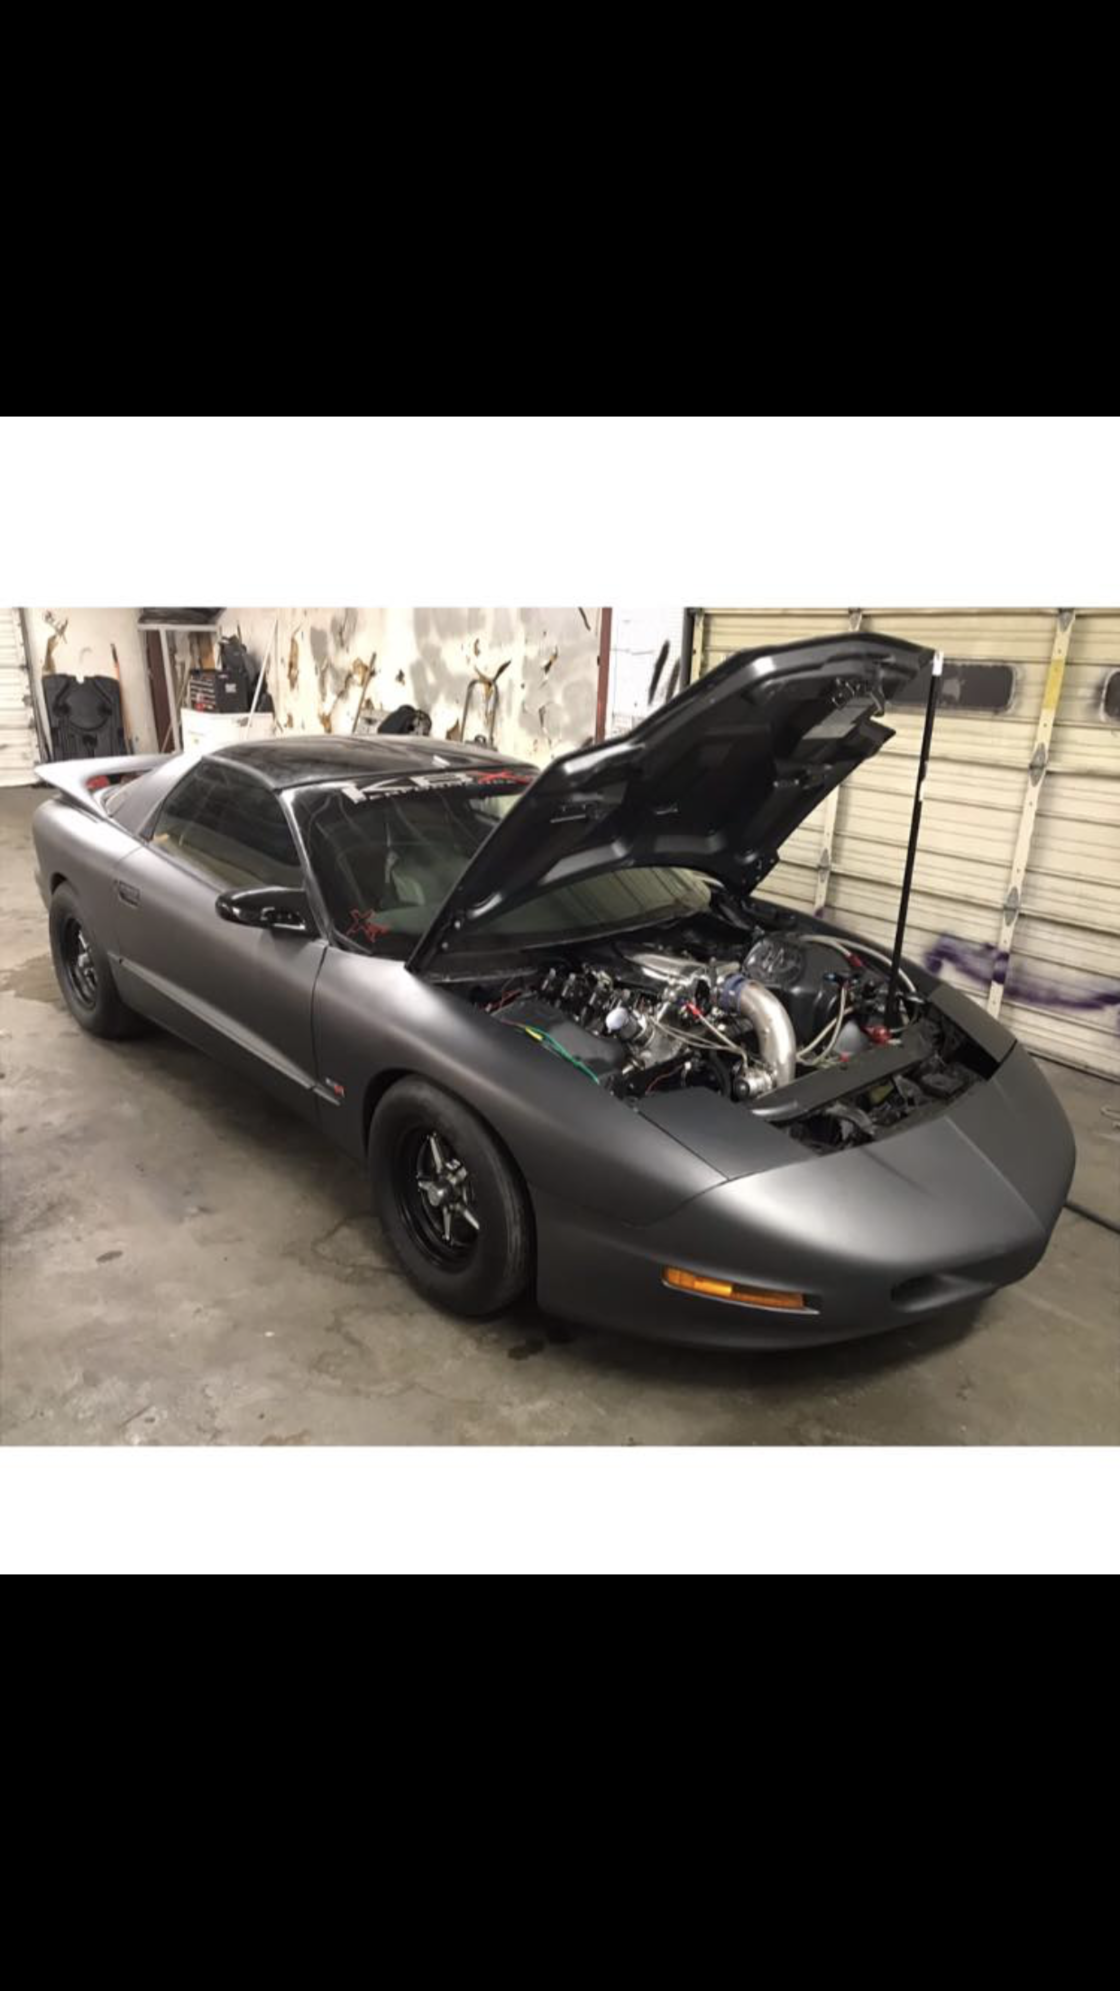 1996 Pontiac Firebird - 408 ls f1 94 procharger  Holley efi th400 12 bolt firebird trade or sell - Used - VIN 6299hskslo8 - 8 cyl - 2WD - Automatic - Hatchback - Summerton, SC 29148, United States